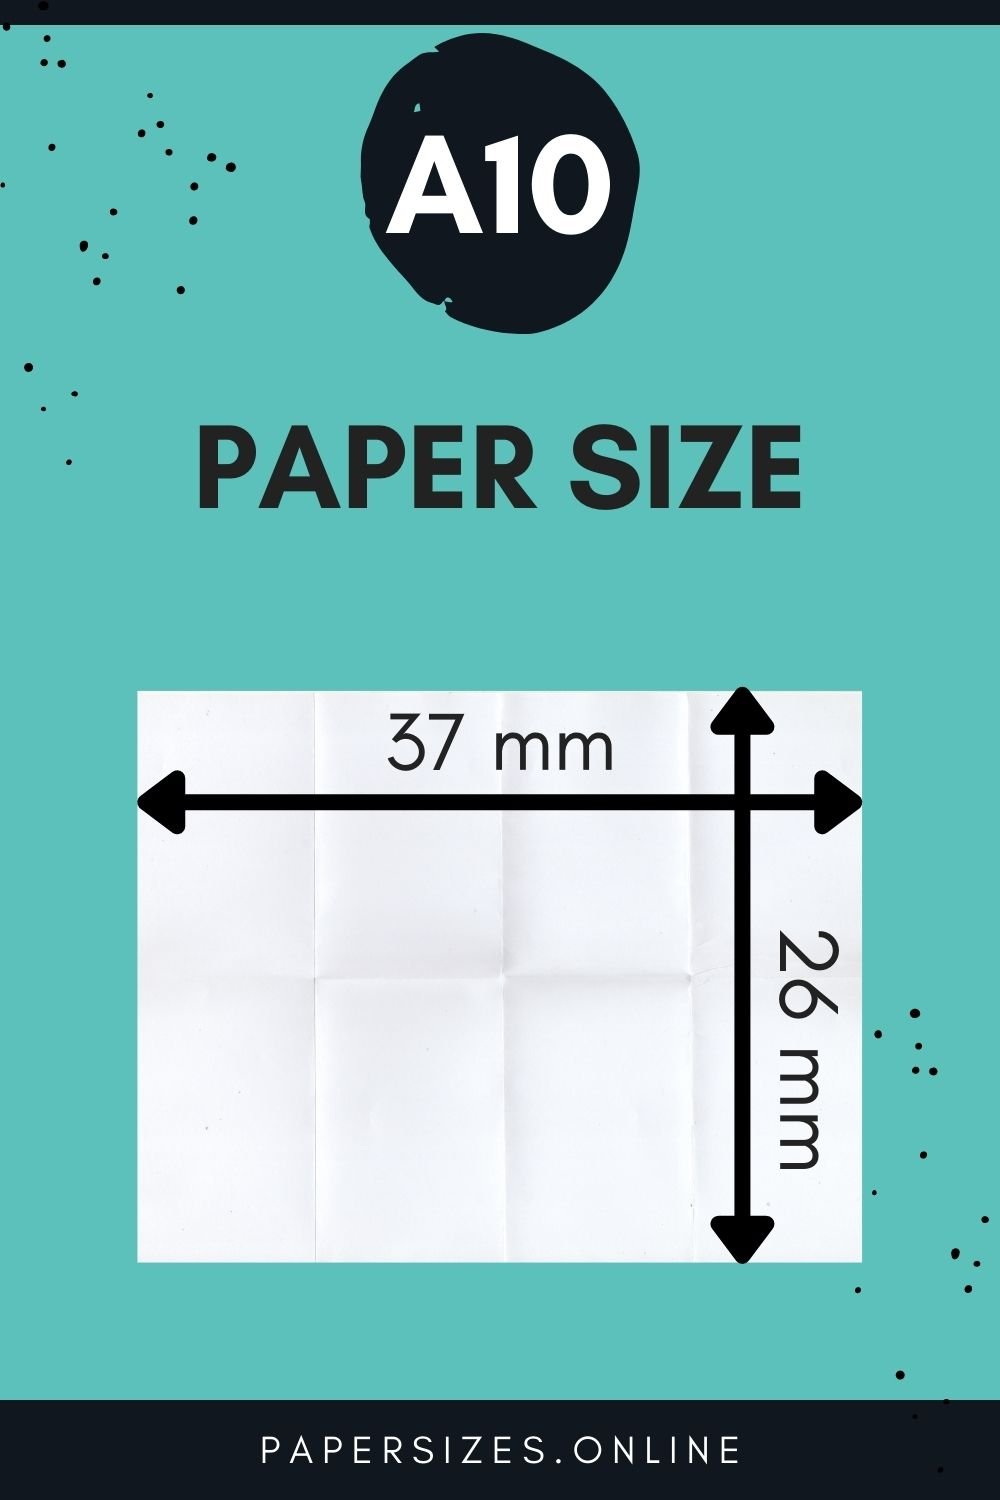 A10 paper size in mm